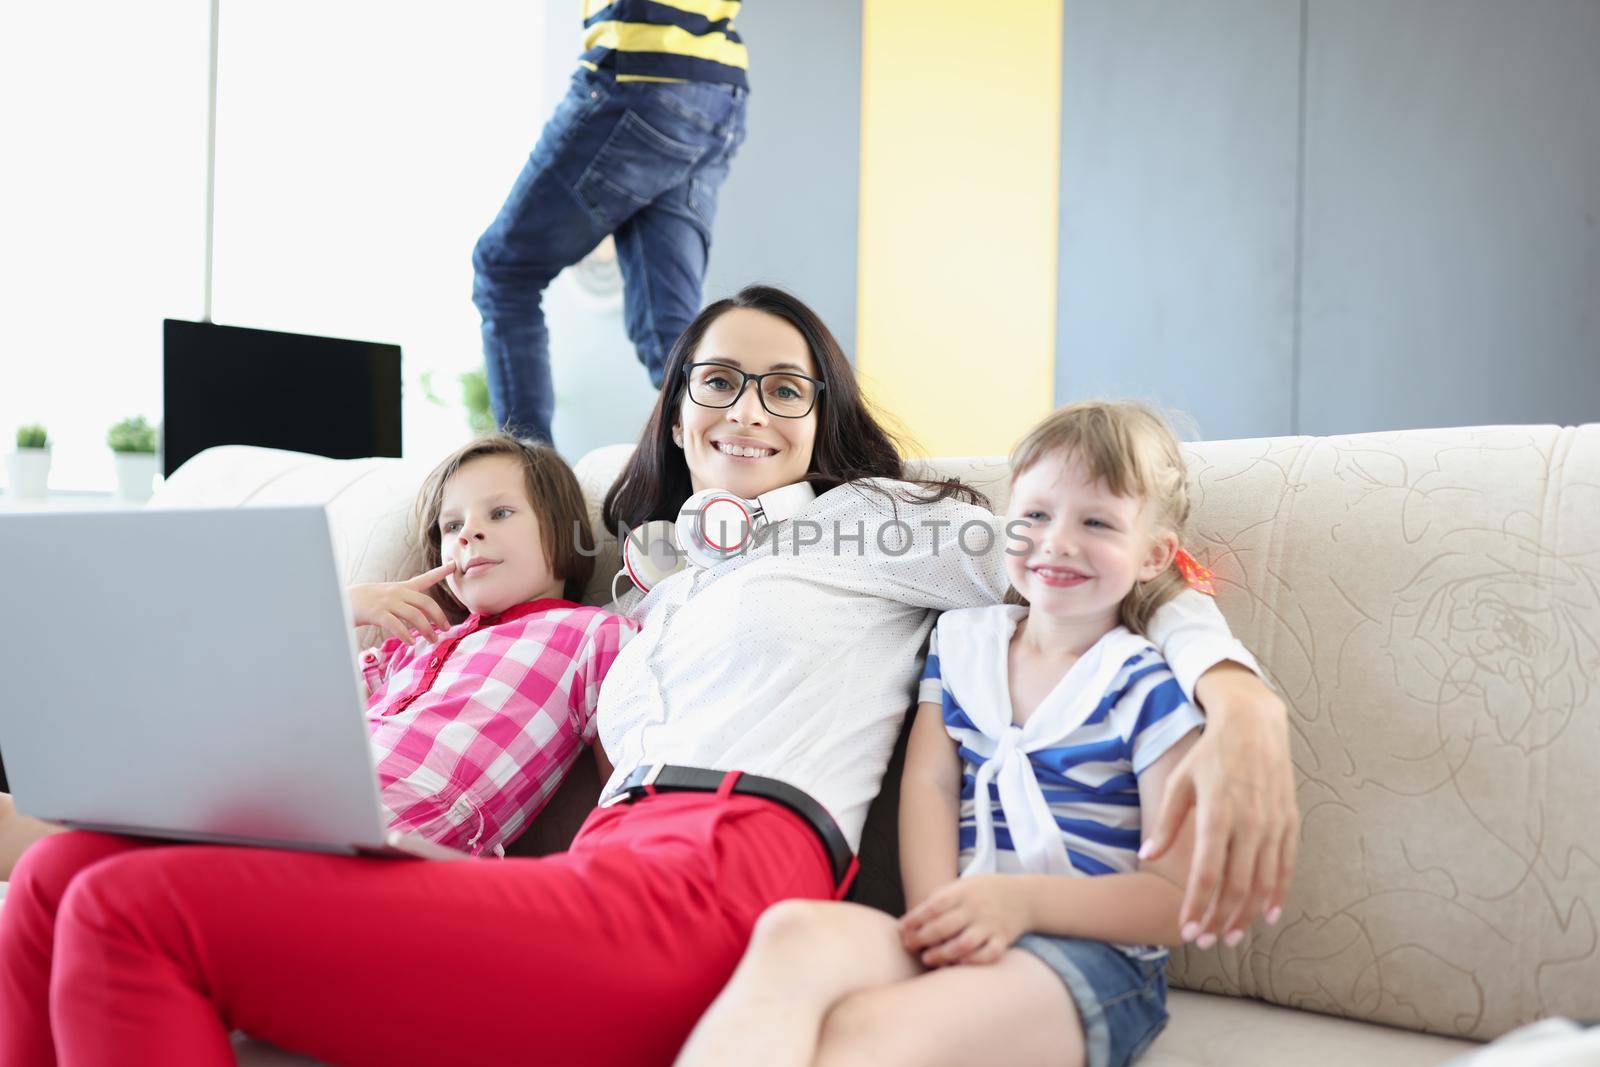 Portrait of happy woman posing with her kids on couch while working on laptop. Mother work from home, earn money for children. Parenthood, weekend concept